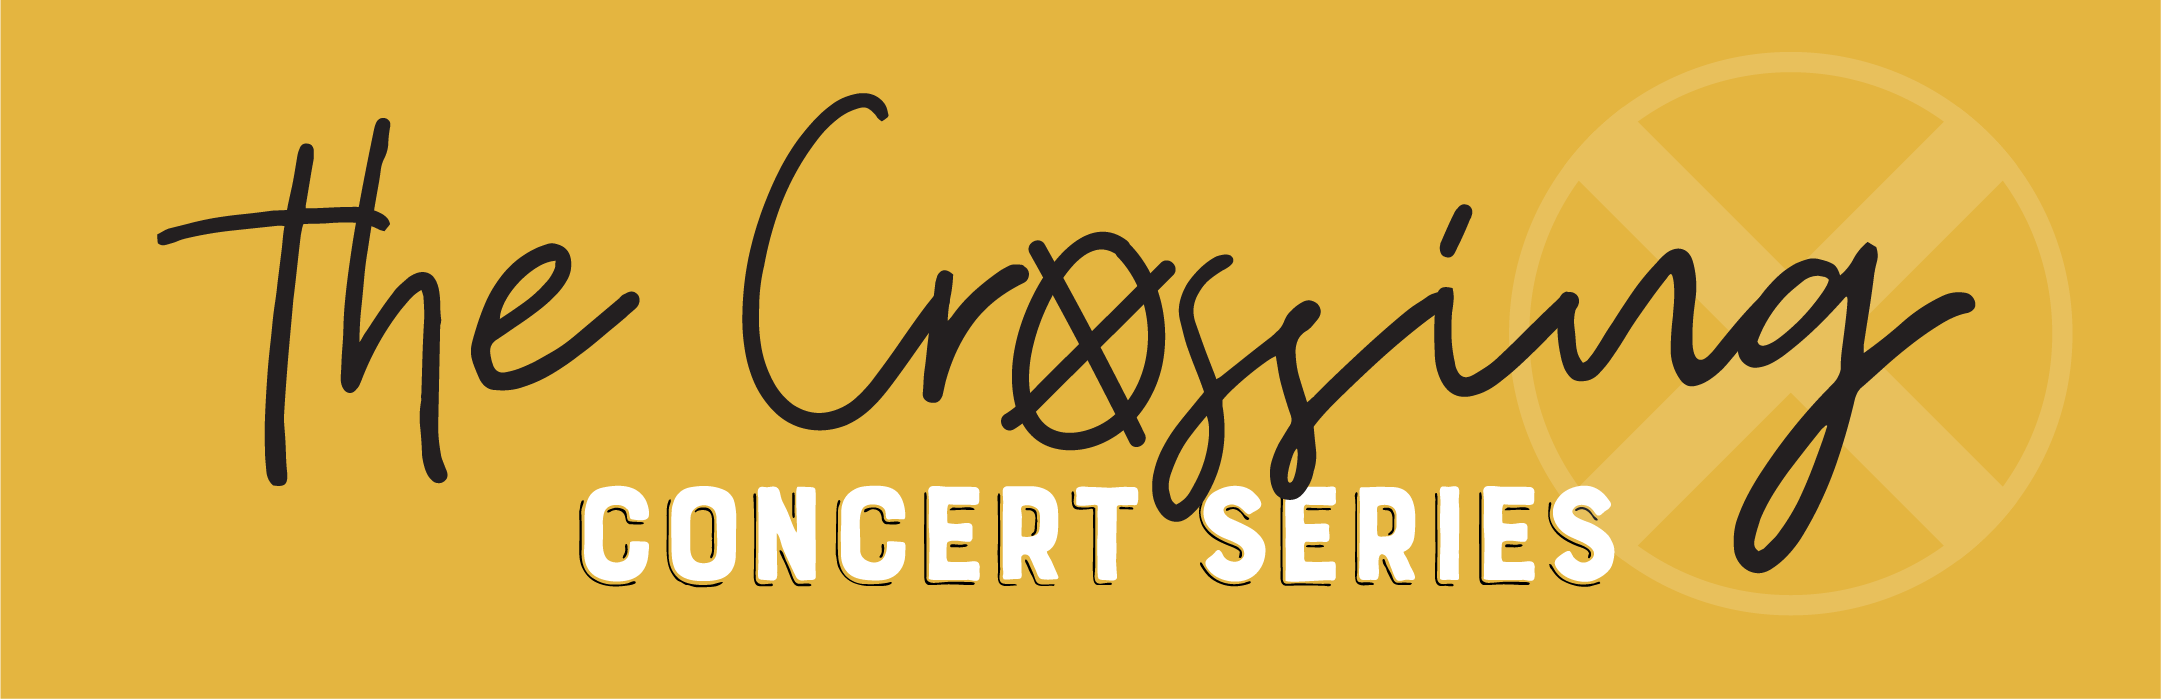 The Crossing Concert Series